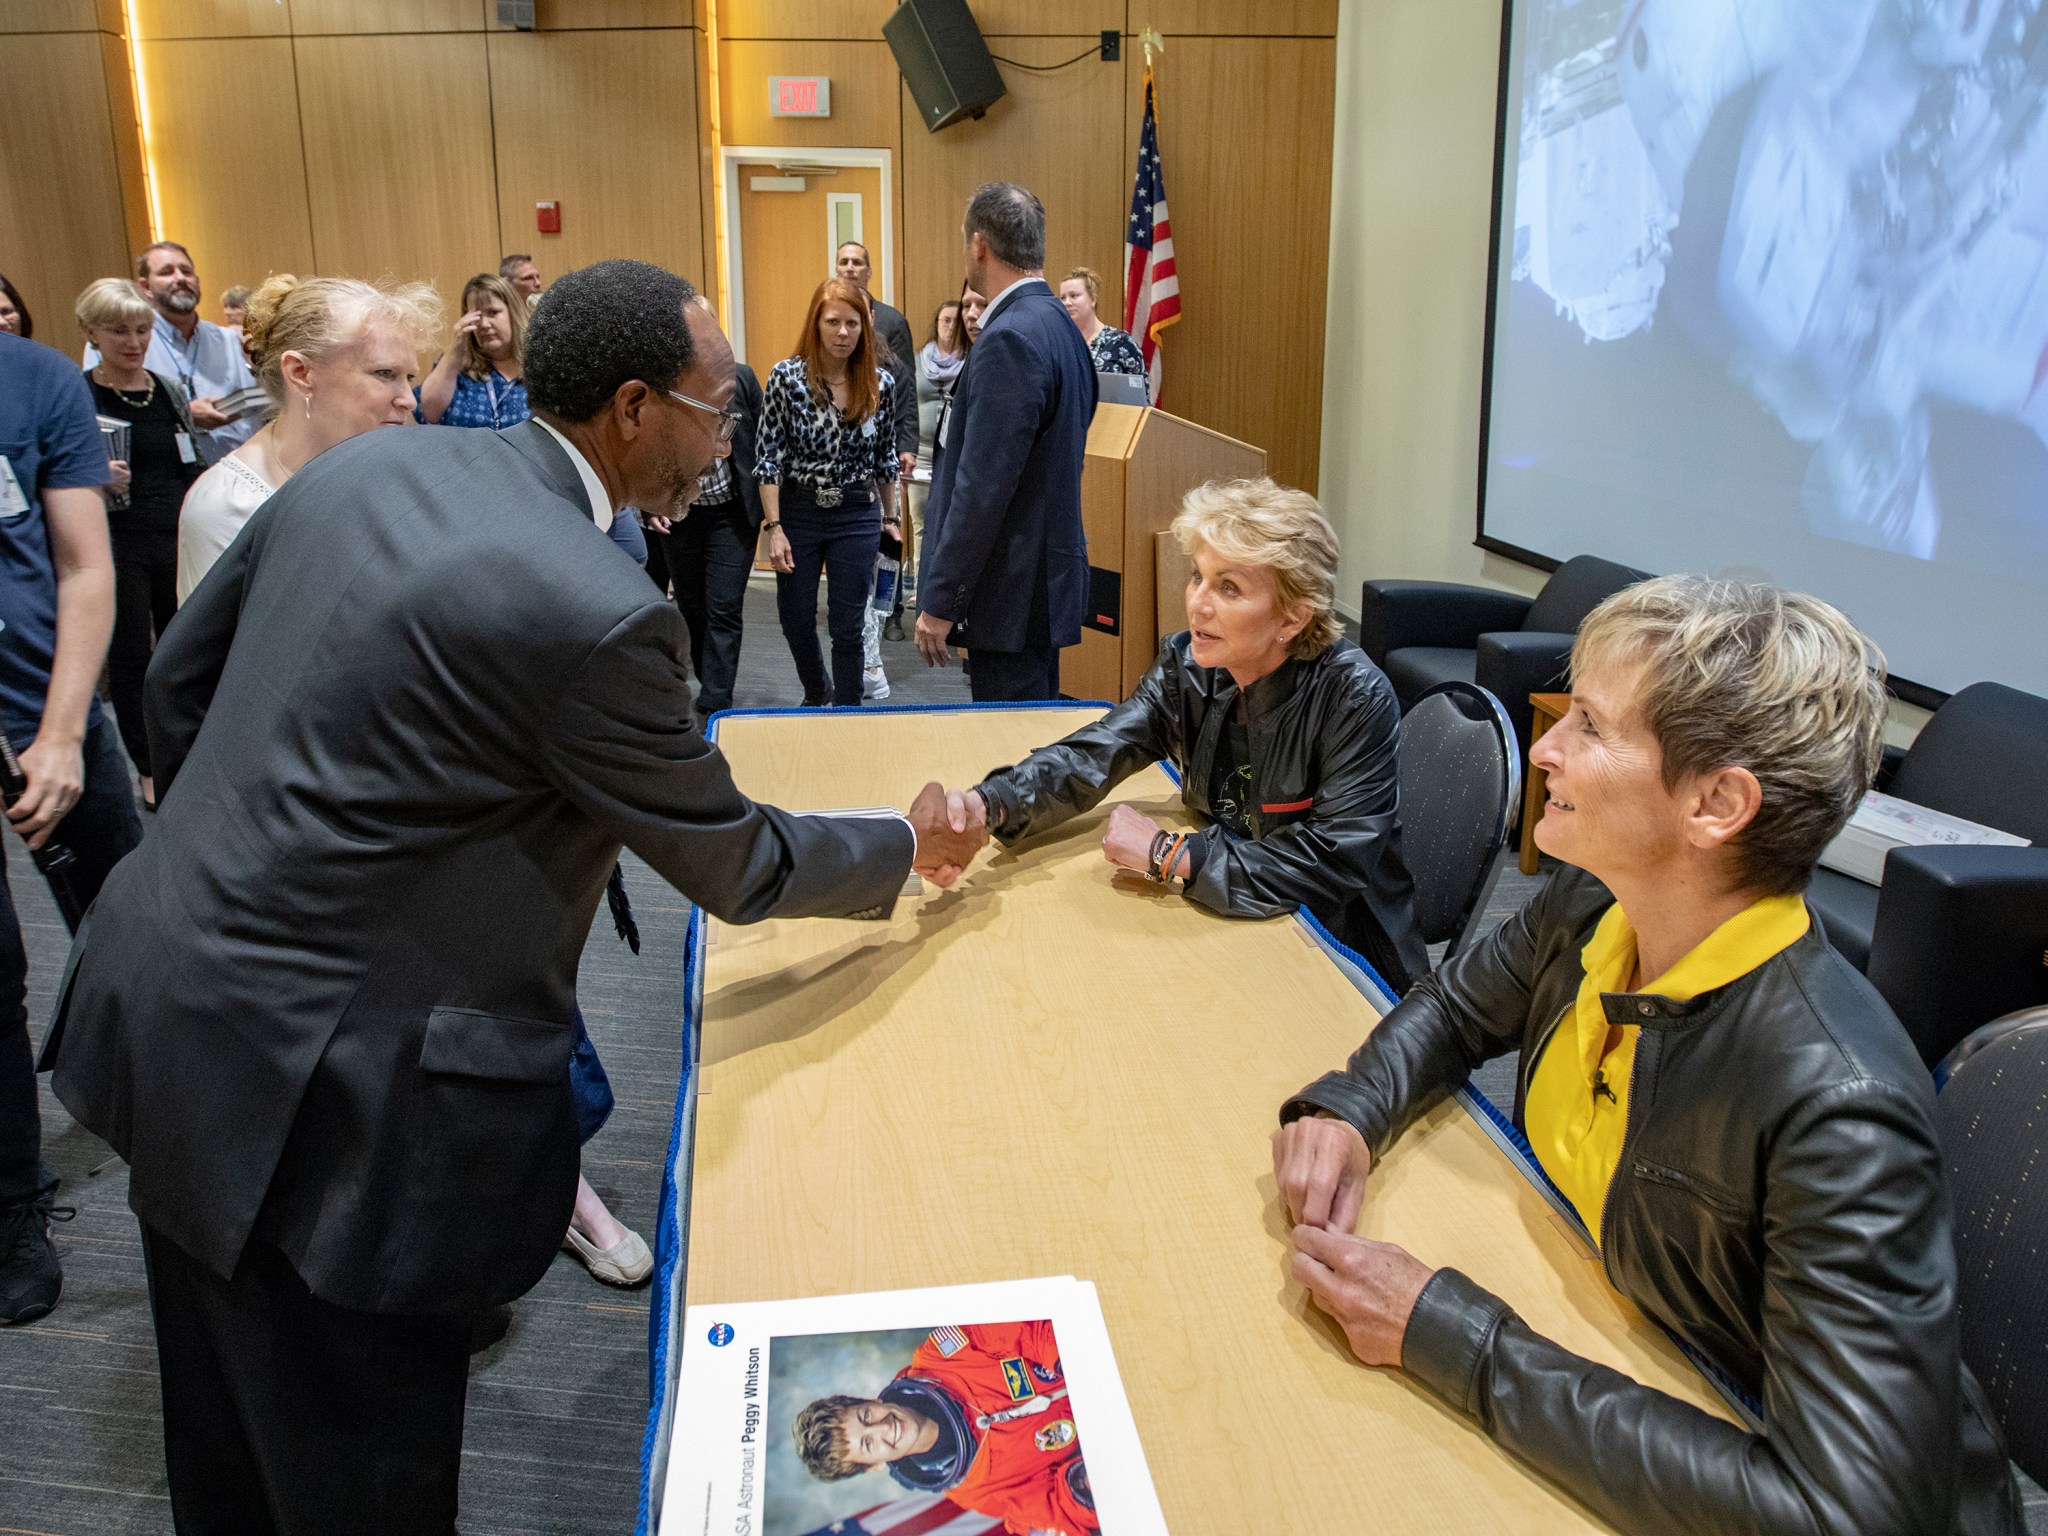 NASA Langley Center Director Clayton Turner greets Cornwell and Whitson after the question-and-answer session.